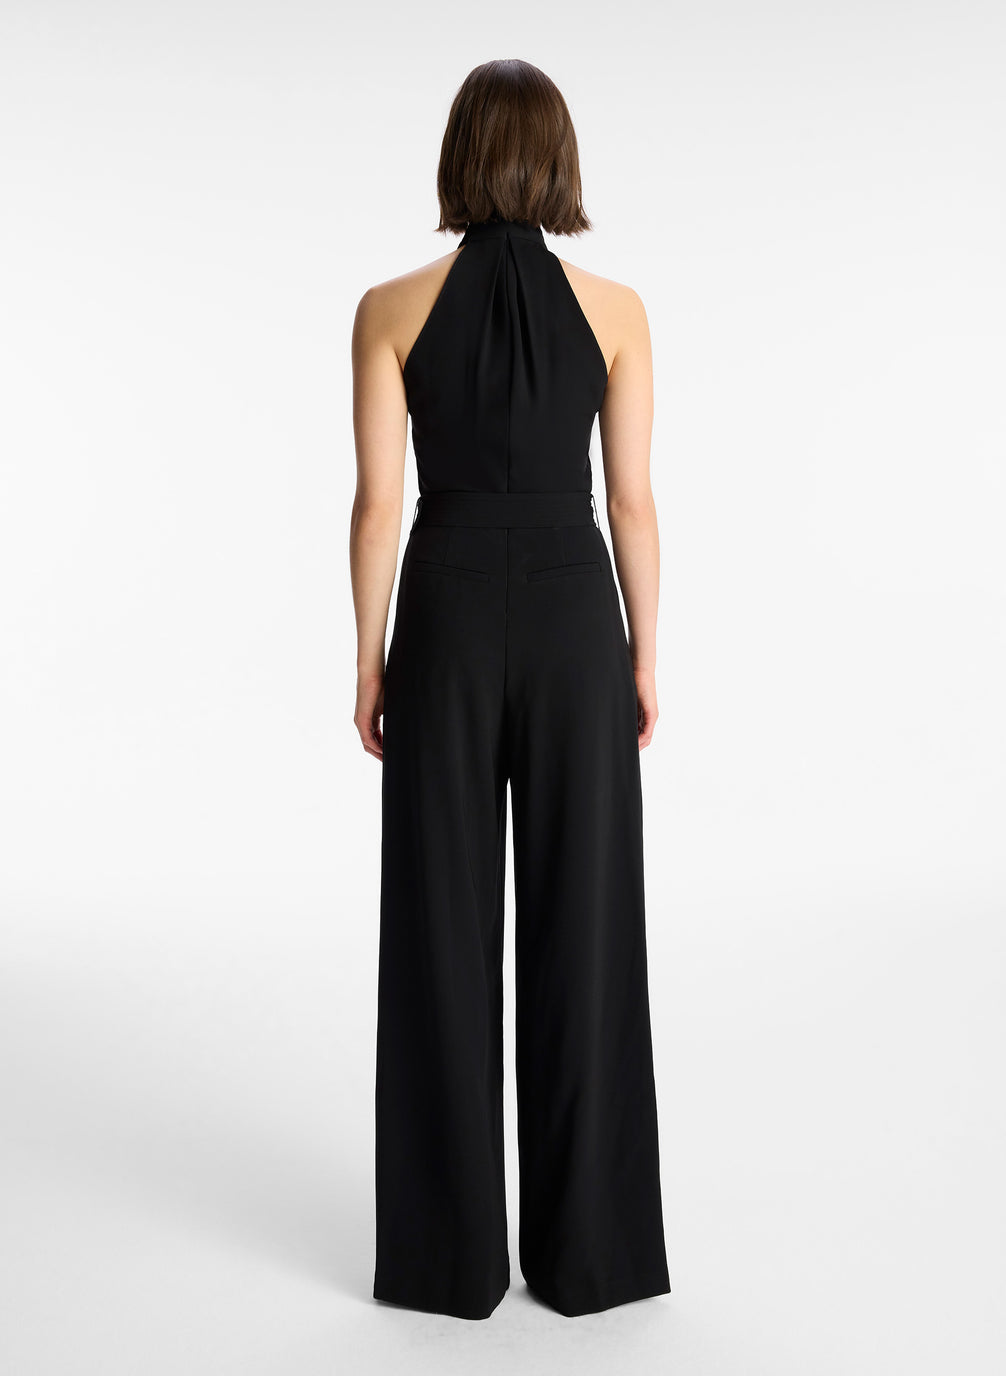 back view of woman in black sleeveless wide leg jumpsuit